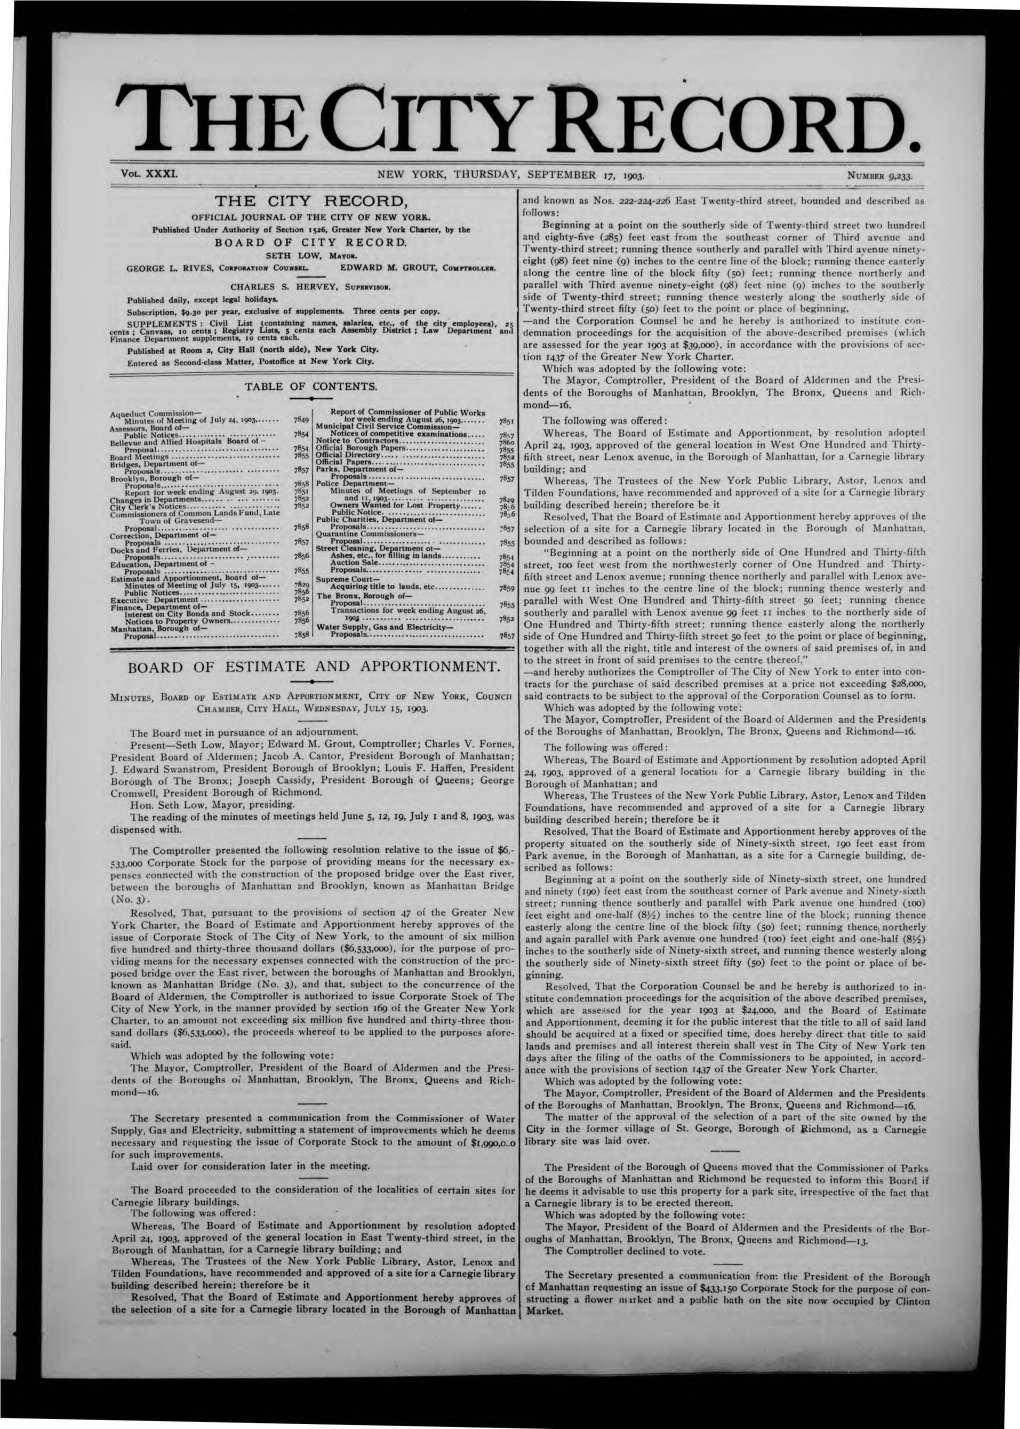 The City Record, Board of Estimate and Apportionment